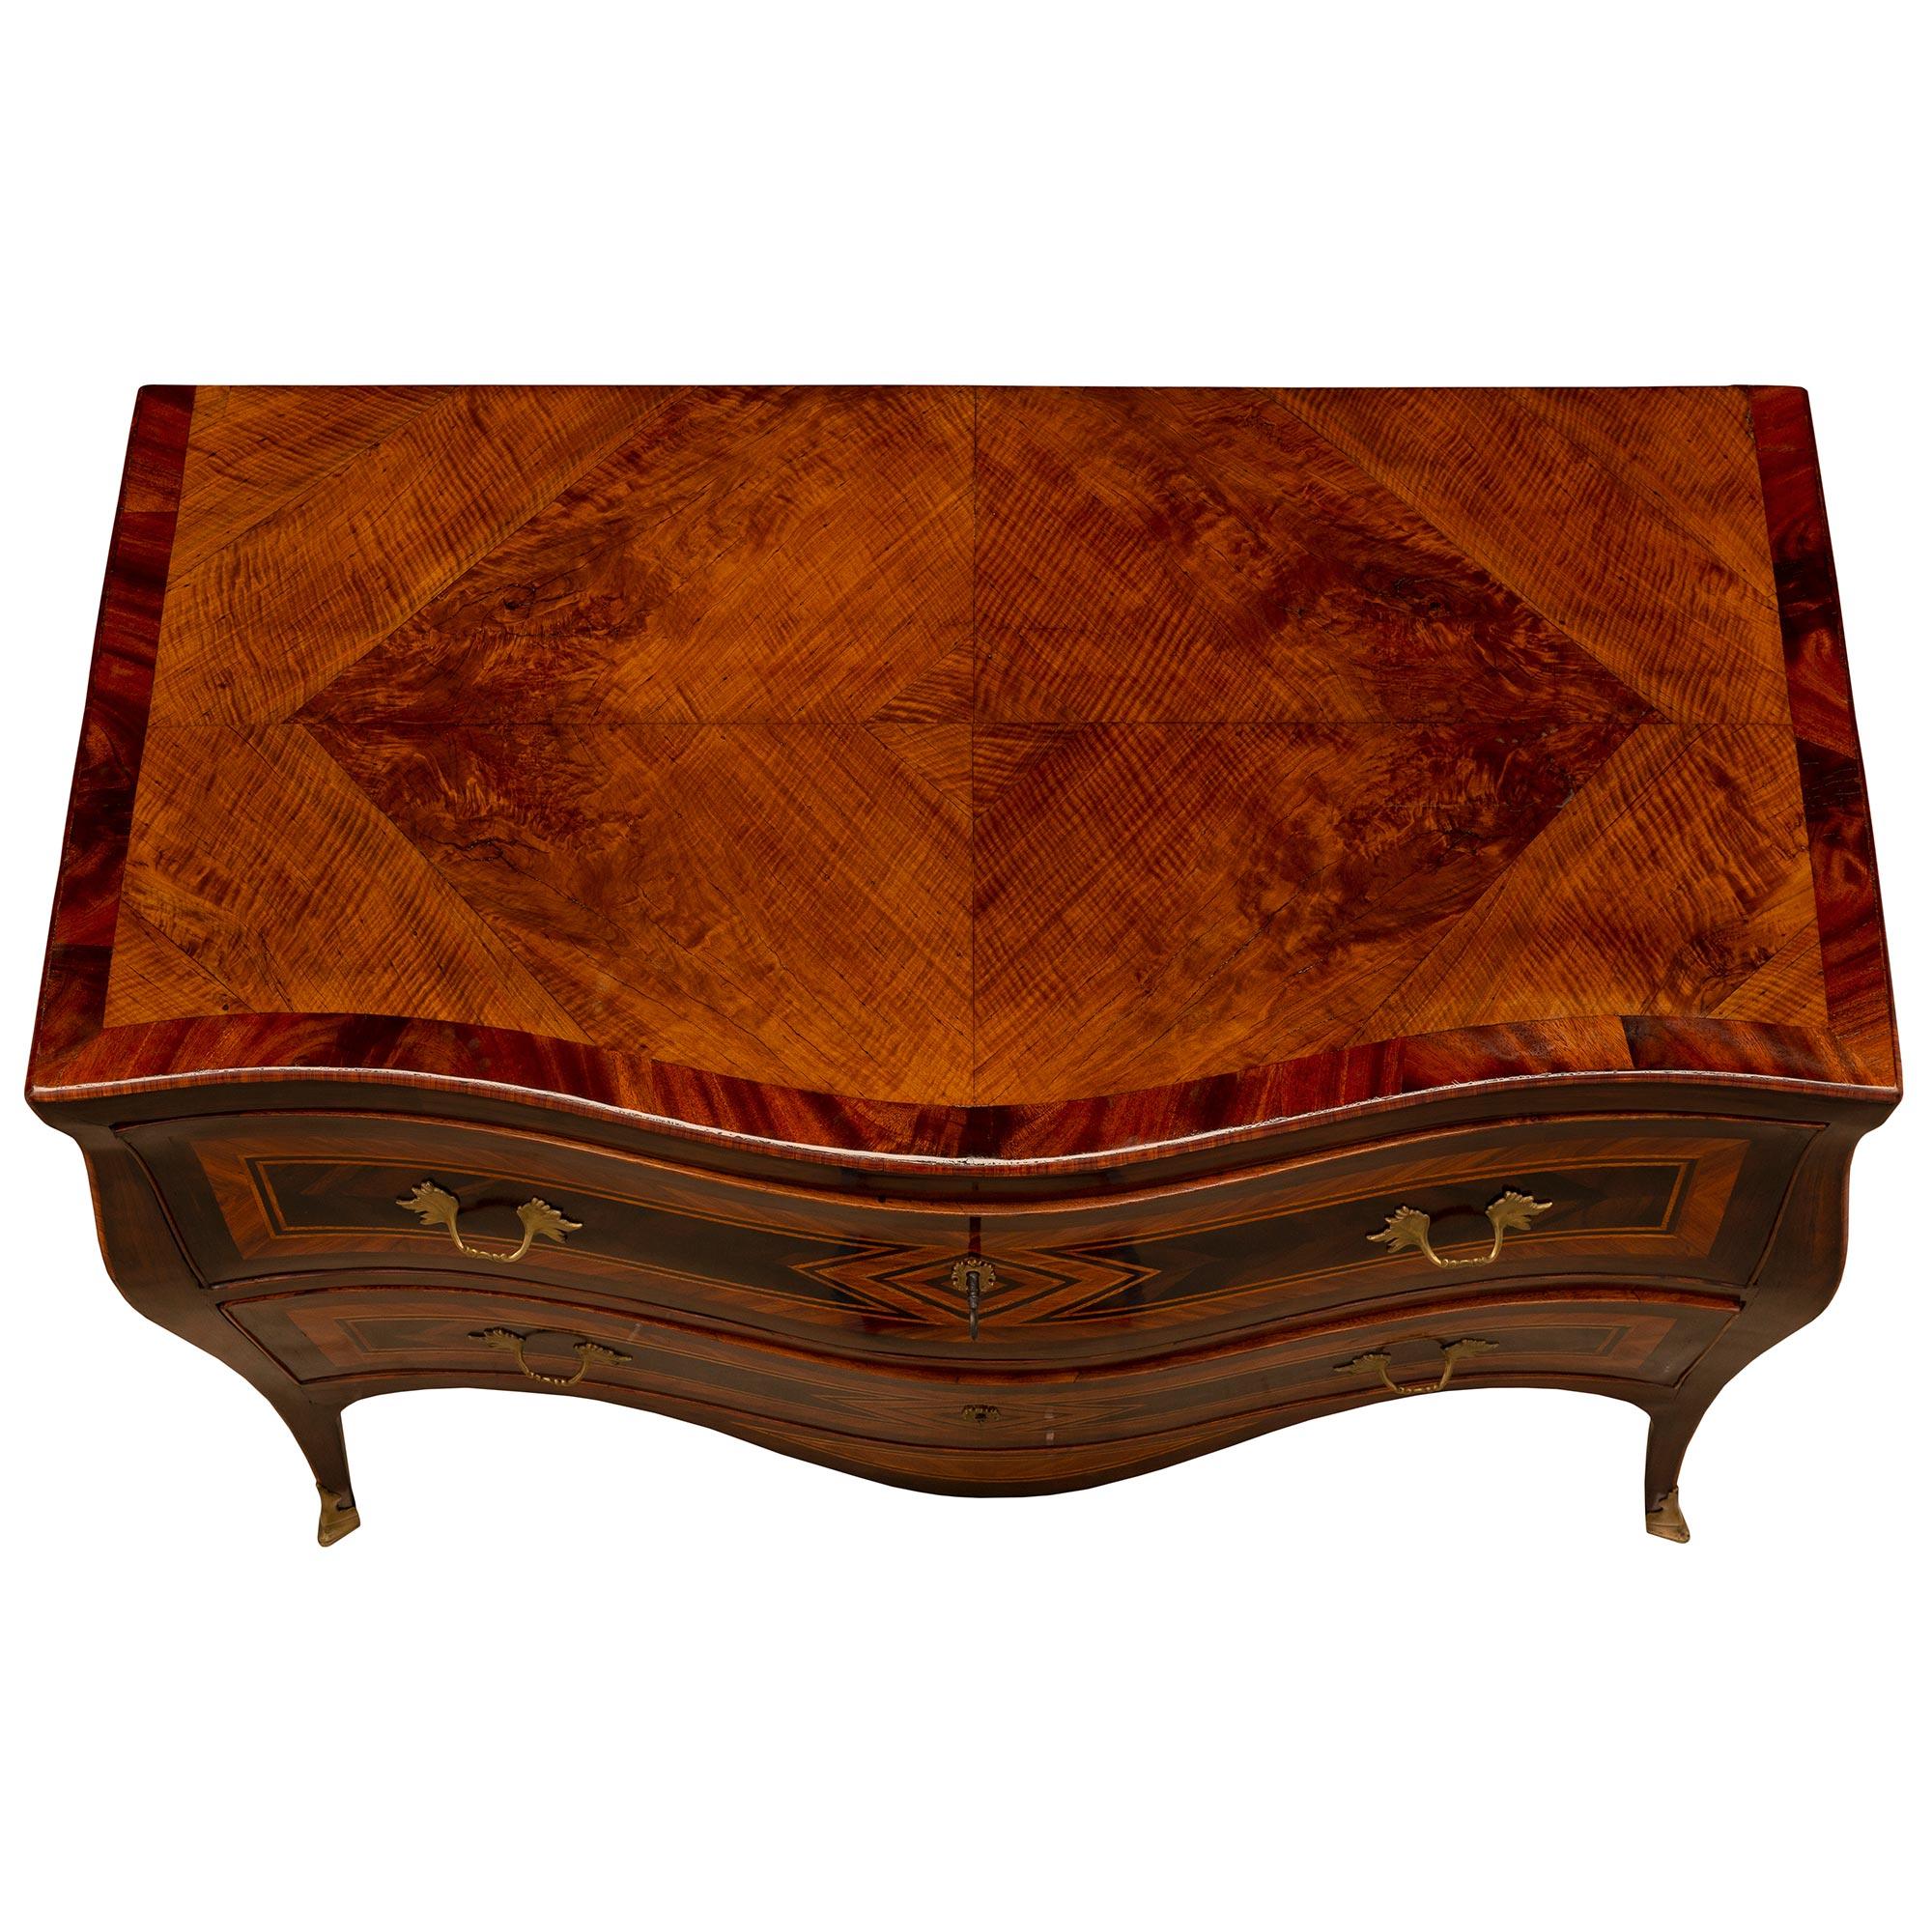 An outstanding Italian 18th century Louis XV period Rosewood, Kingwood, burl Walnut and bronze commode. The two drawer chest is raised by elegant cabriole legs with fine fitted bronze sabots. Above the beautiful deep arbalest shaped frieze is the